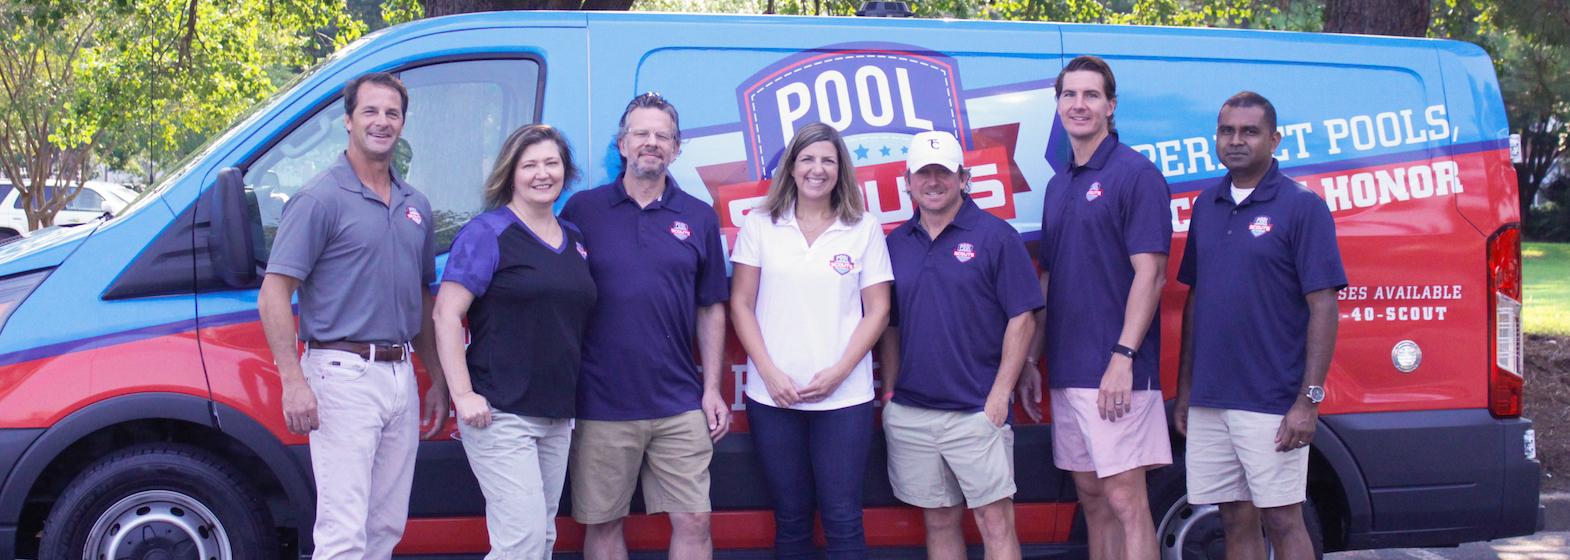 Pool Scouts owners from Dallas standing in front of Pool Scouts van